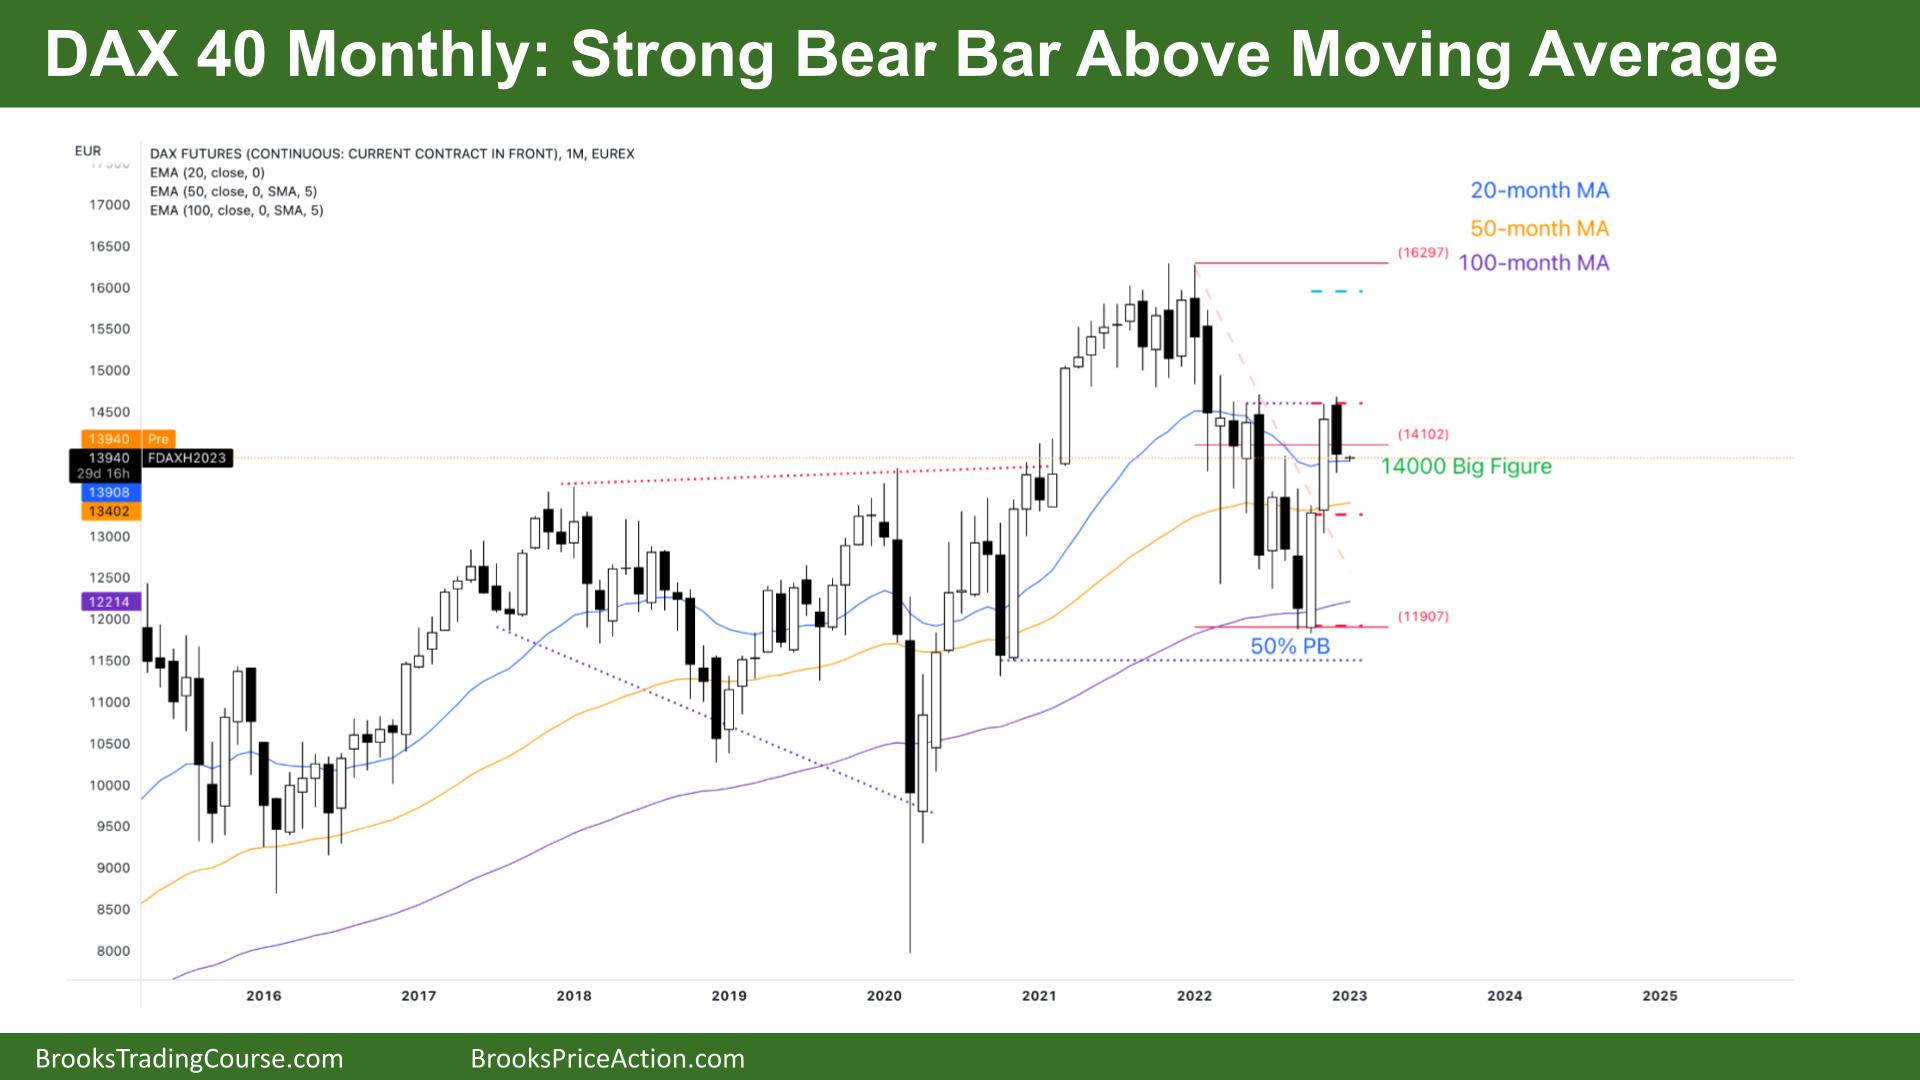 DAX 40 Strong Bear Bar Above Moving Average